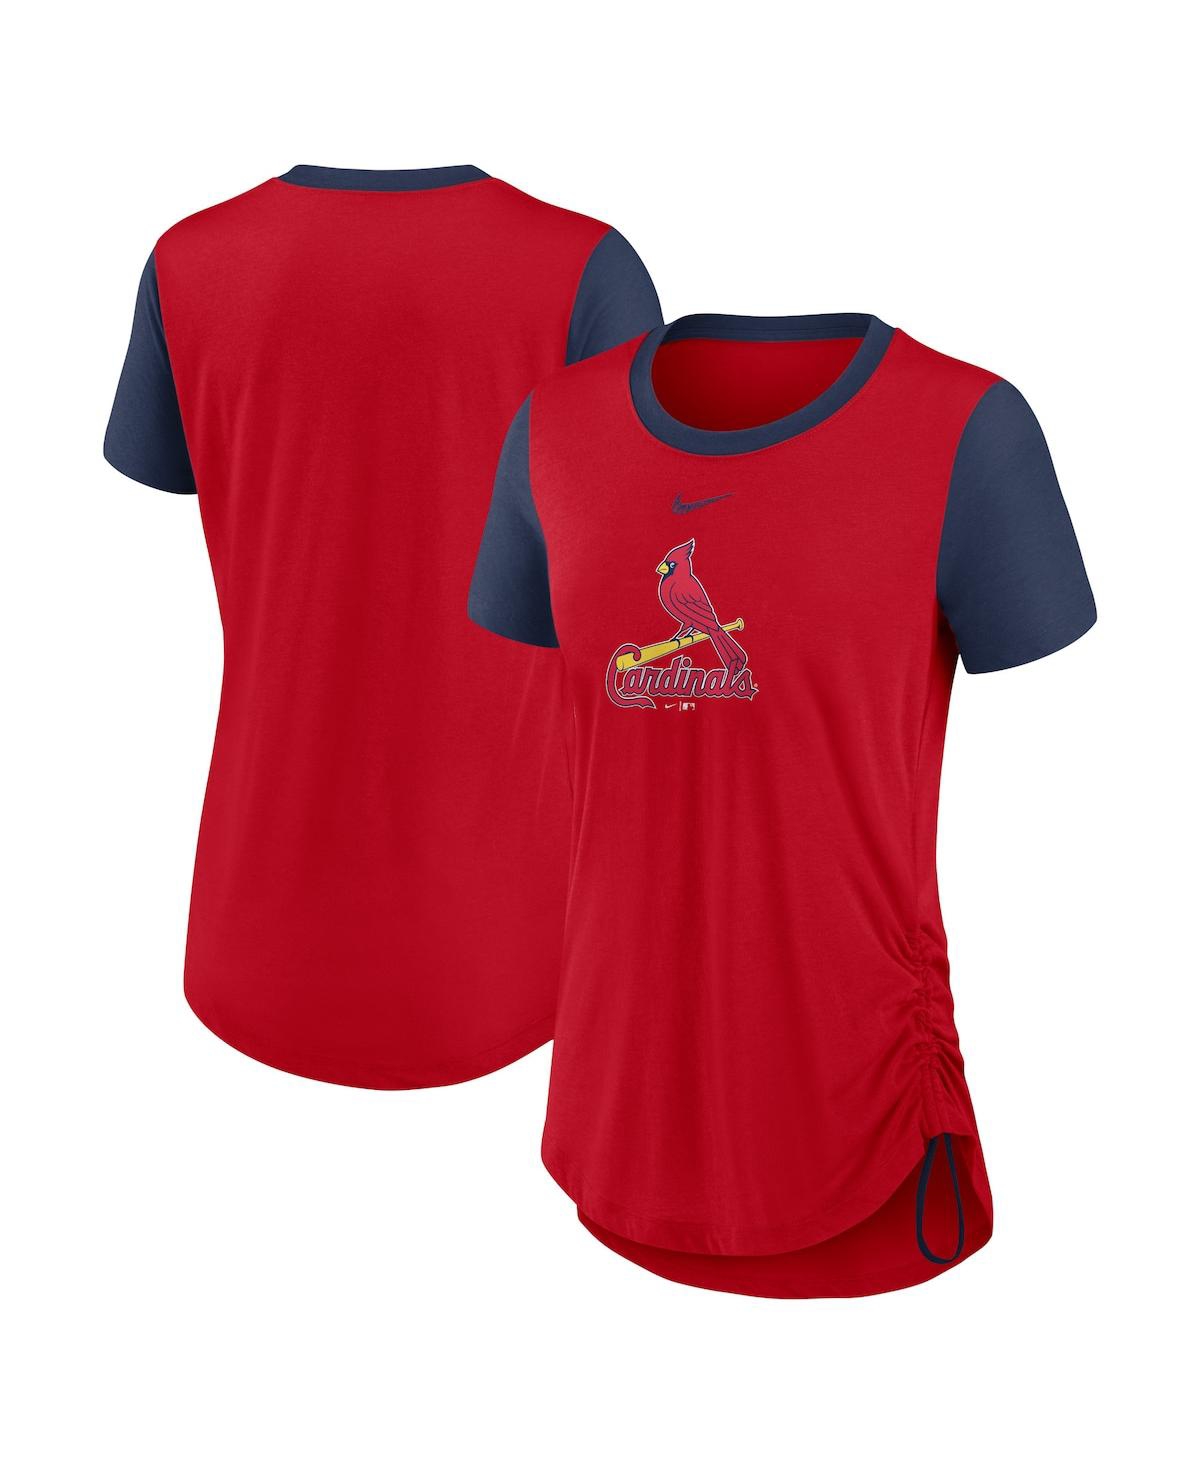 Shop Nike Women's  Red St. Louis Cardinals Hipster Swoosh Cinched Tri-blend Performance Fashion T-shirt